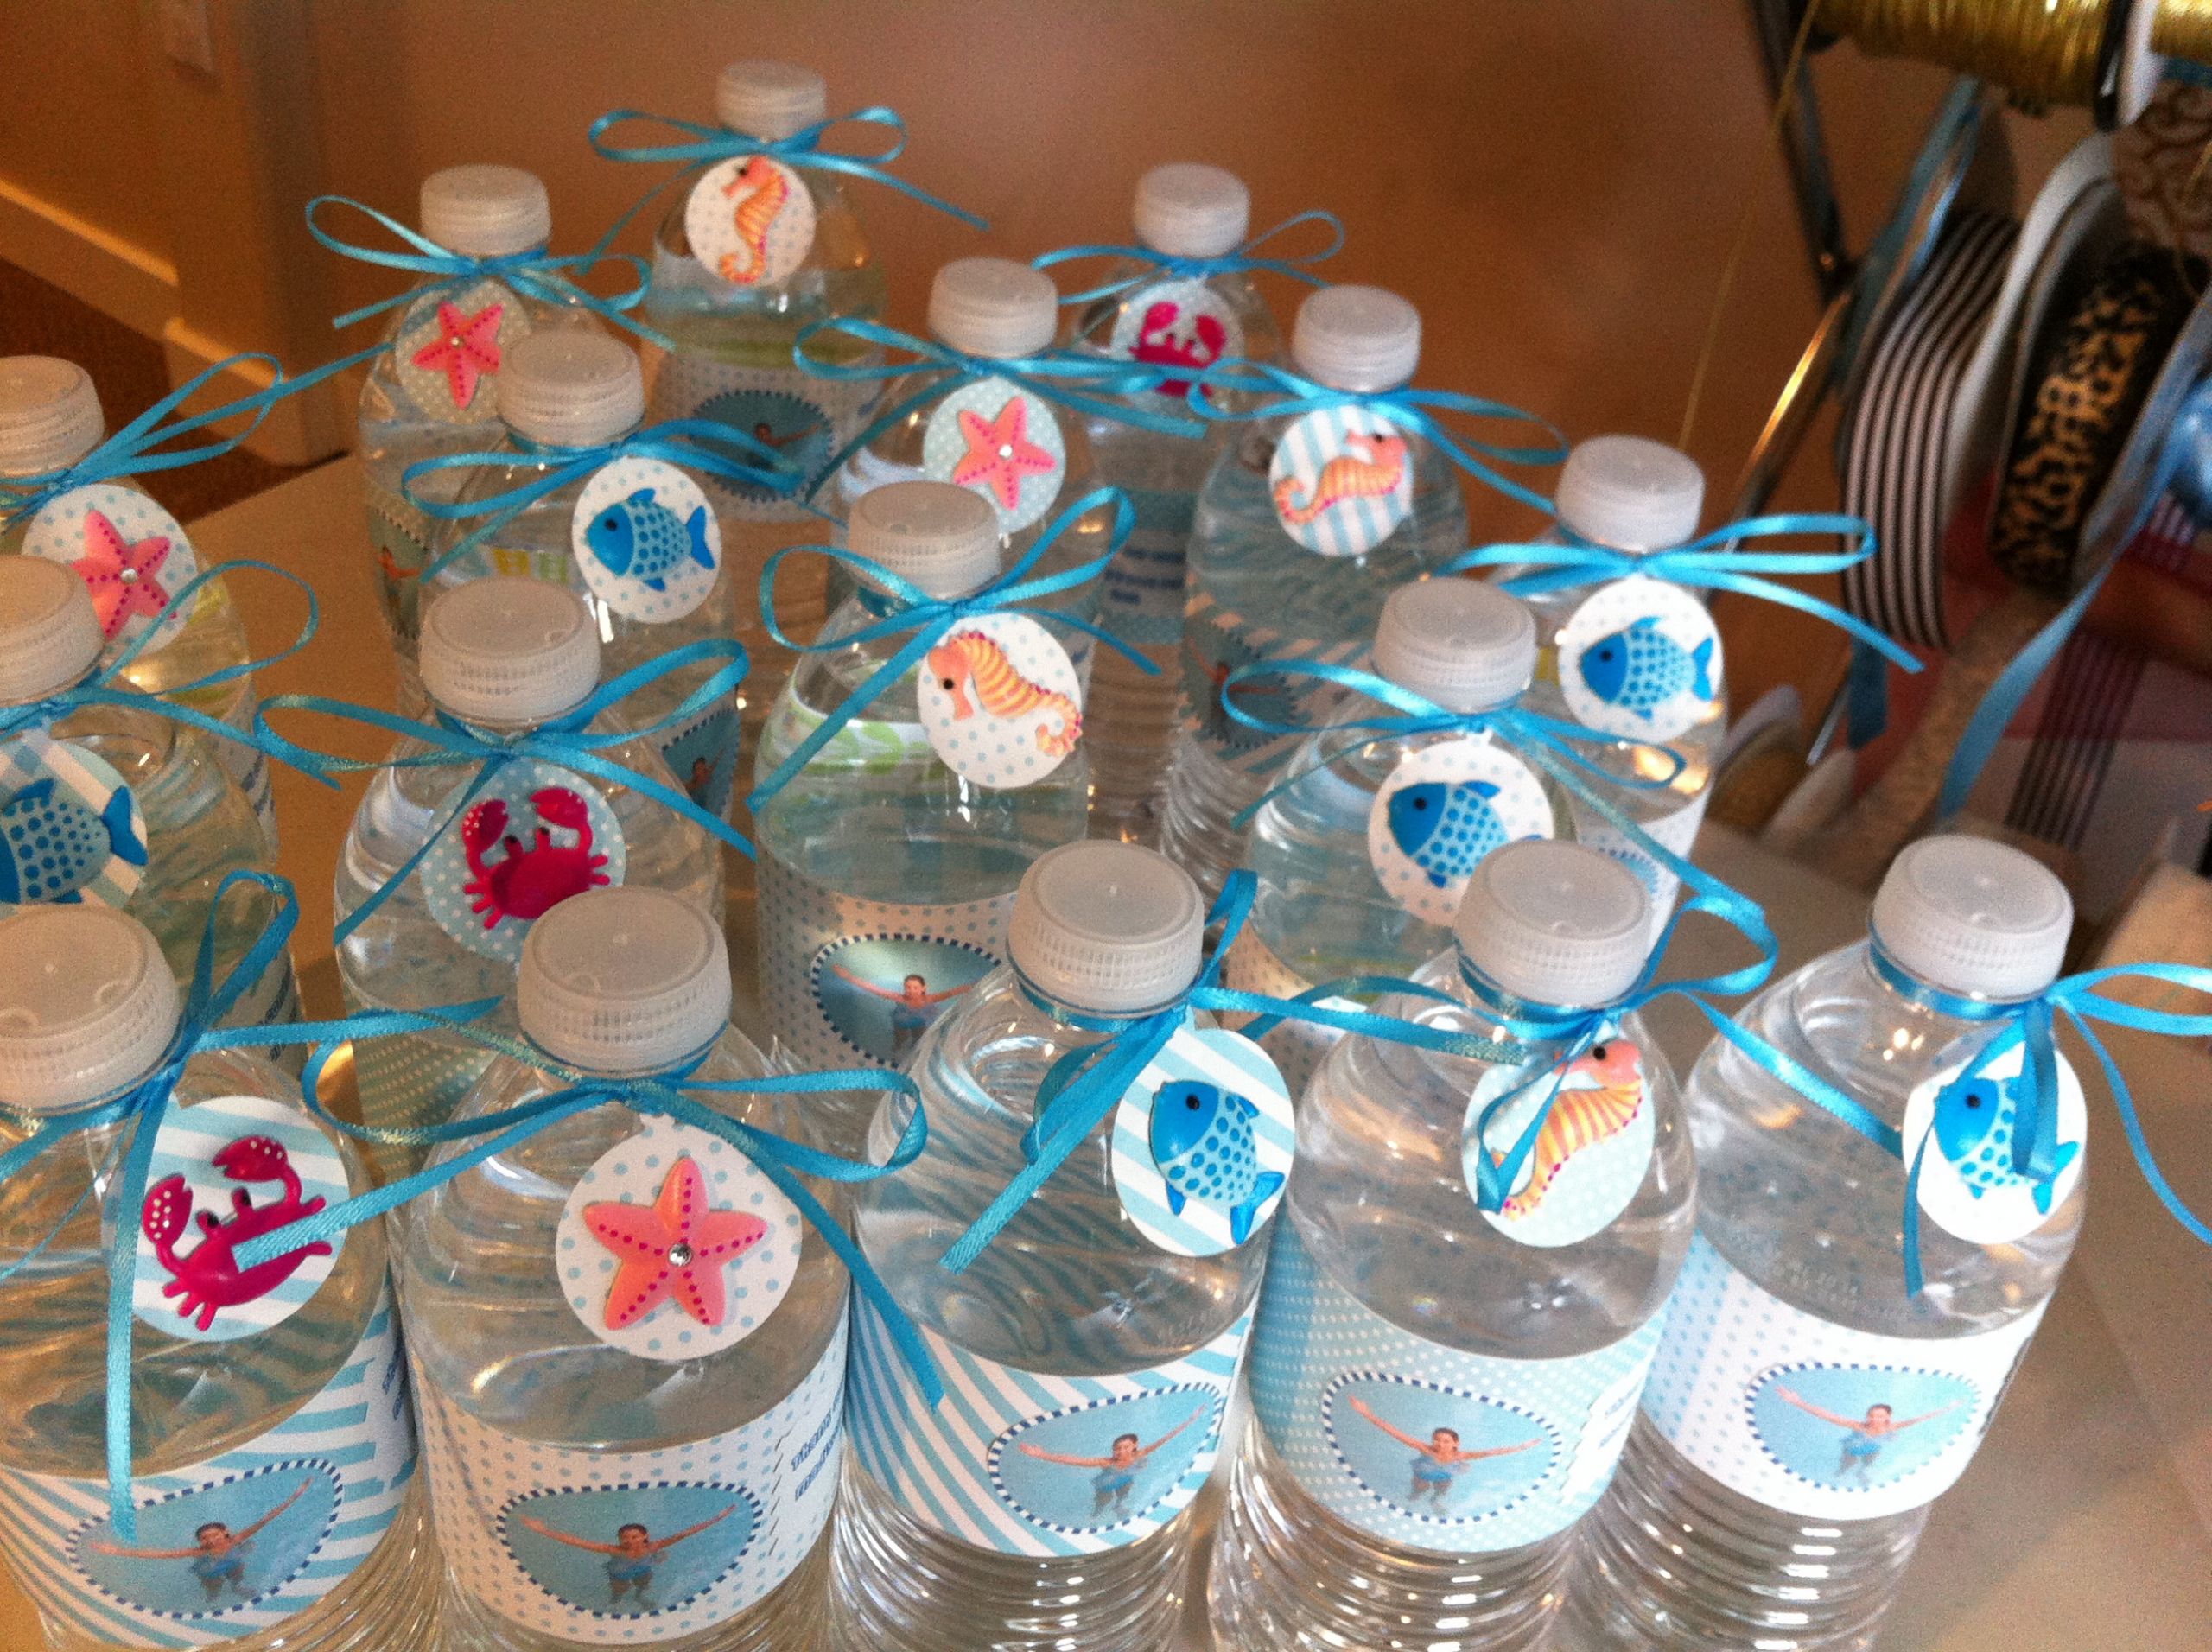 Pool Party Favor Ideas For Kids
 Kids Pool Party on Pinterest